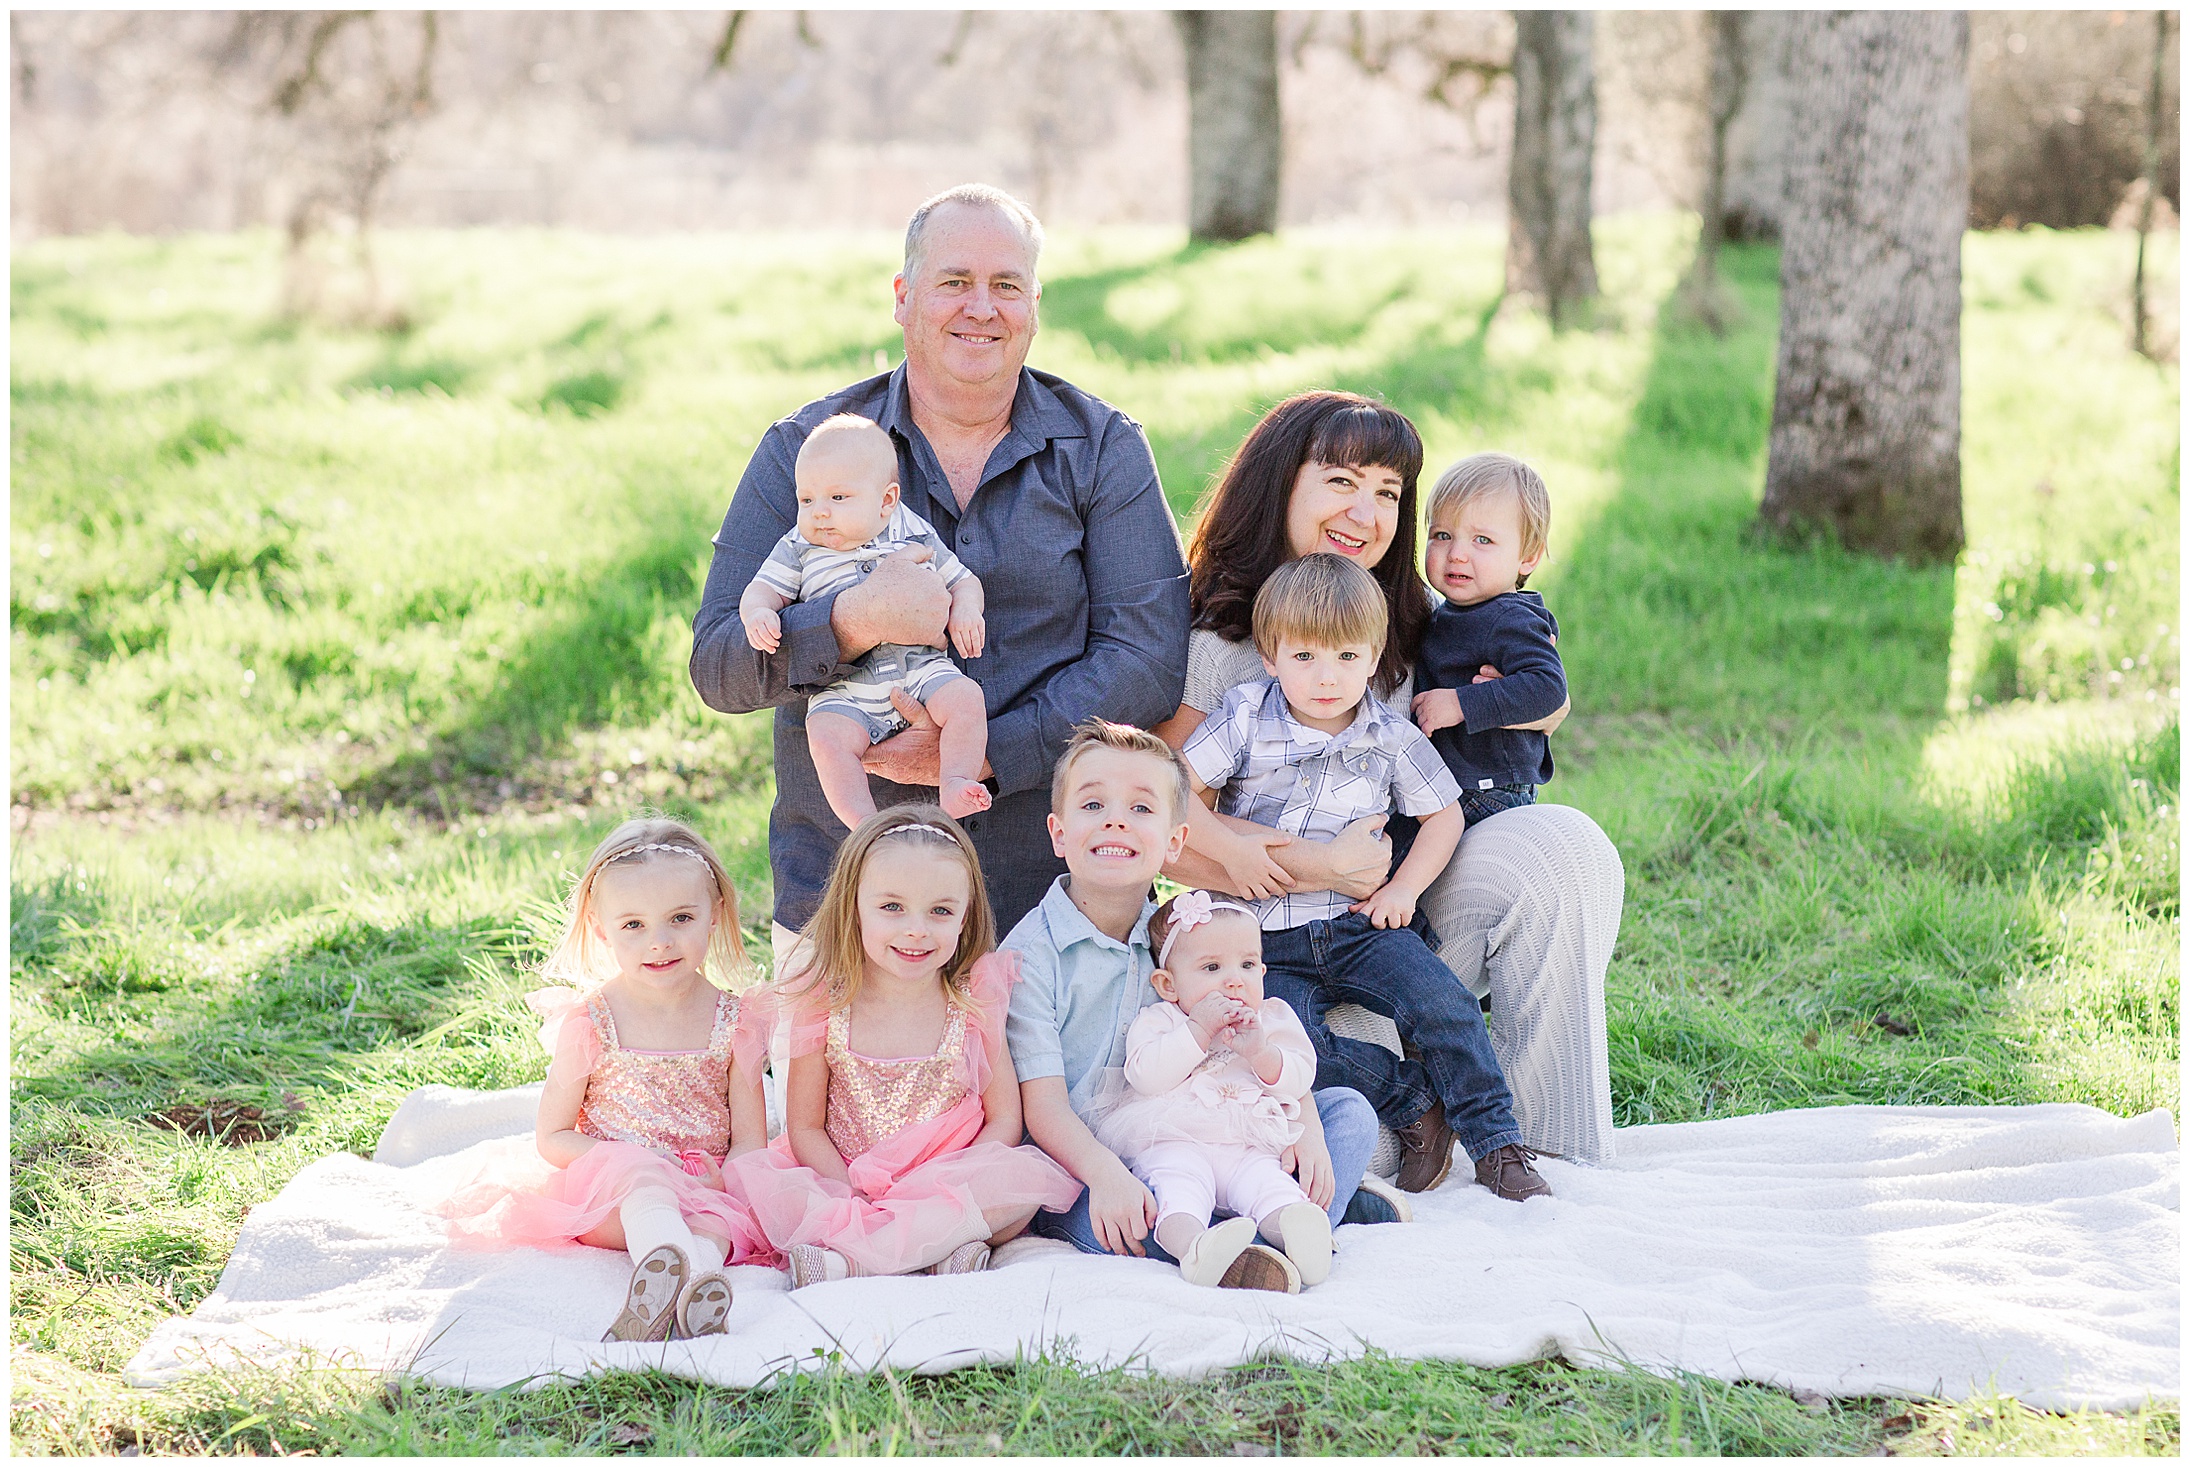 Large Extended Family Session Upper Bidwell Park Chico California Bench Blanket Grandparents,